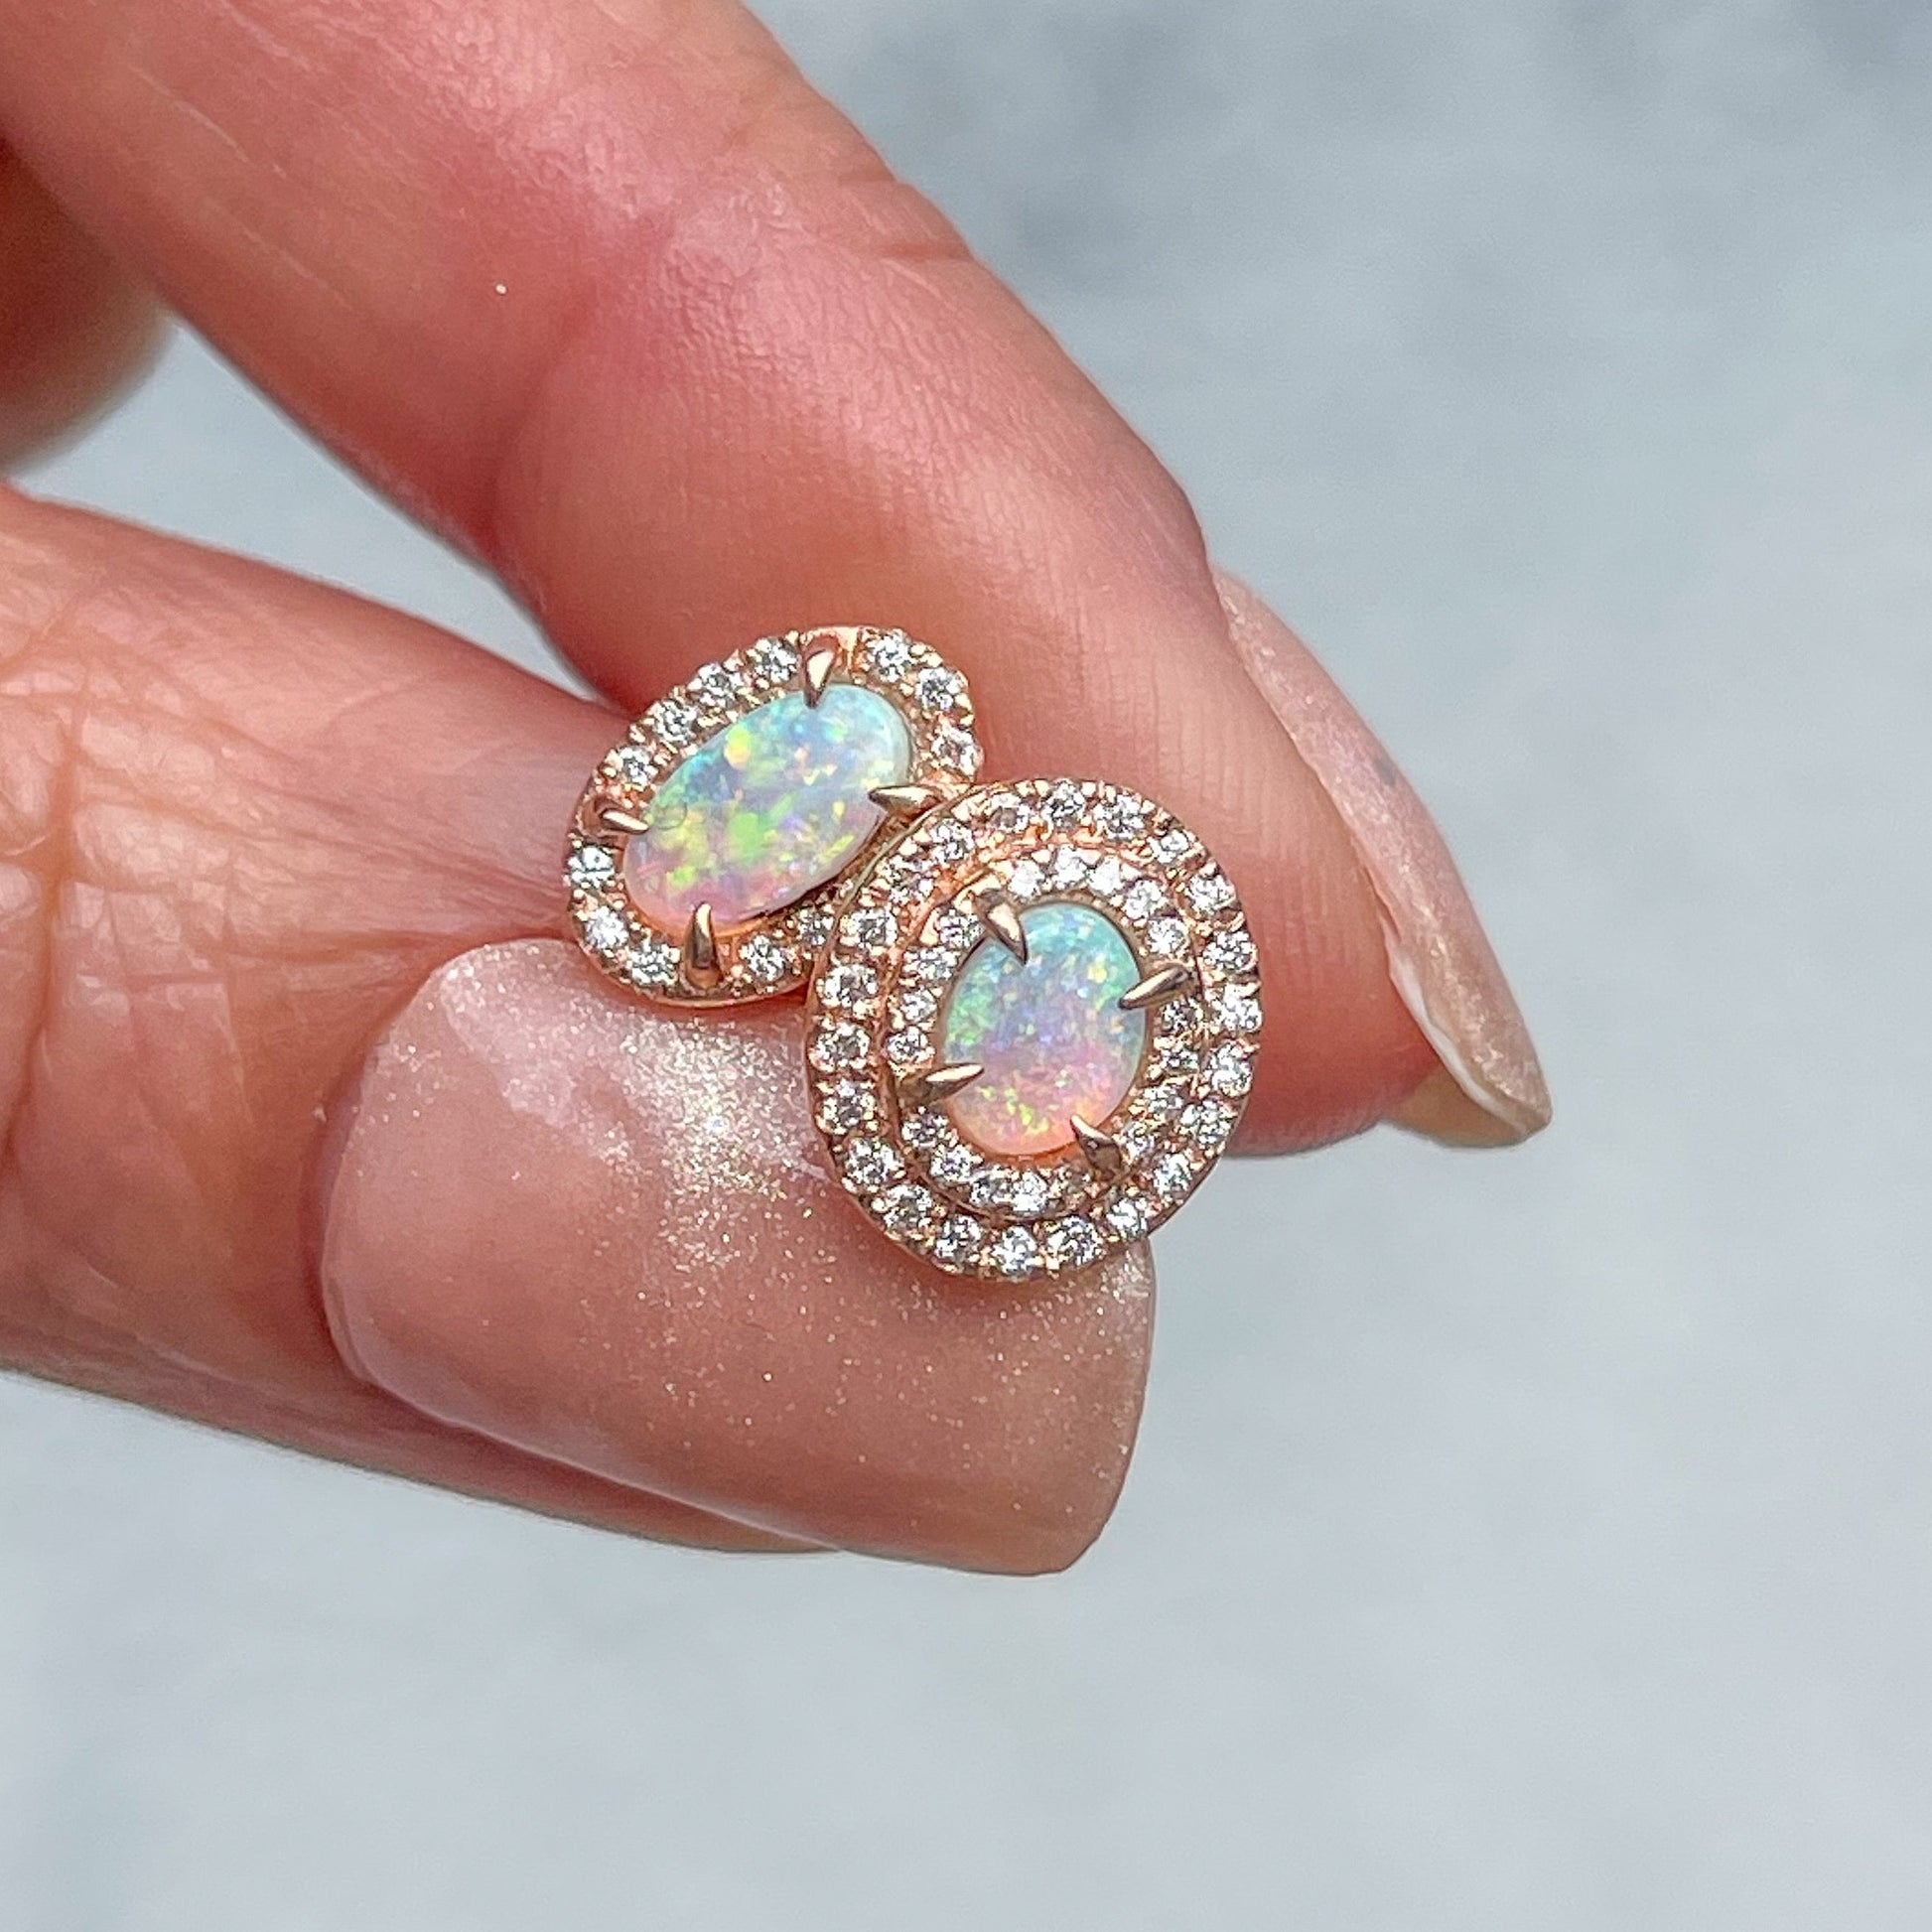 A pair of Australian Opal Earrings by NIXIN Jewelry with diamonds and 14k rose gold setting. 